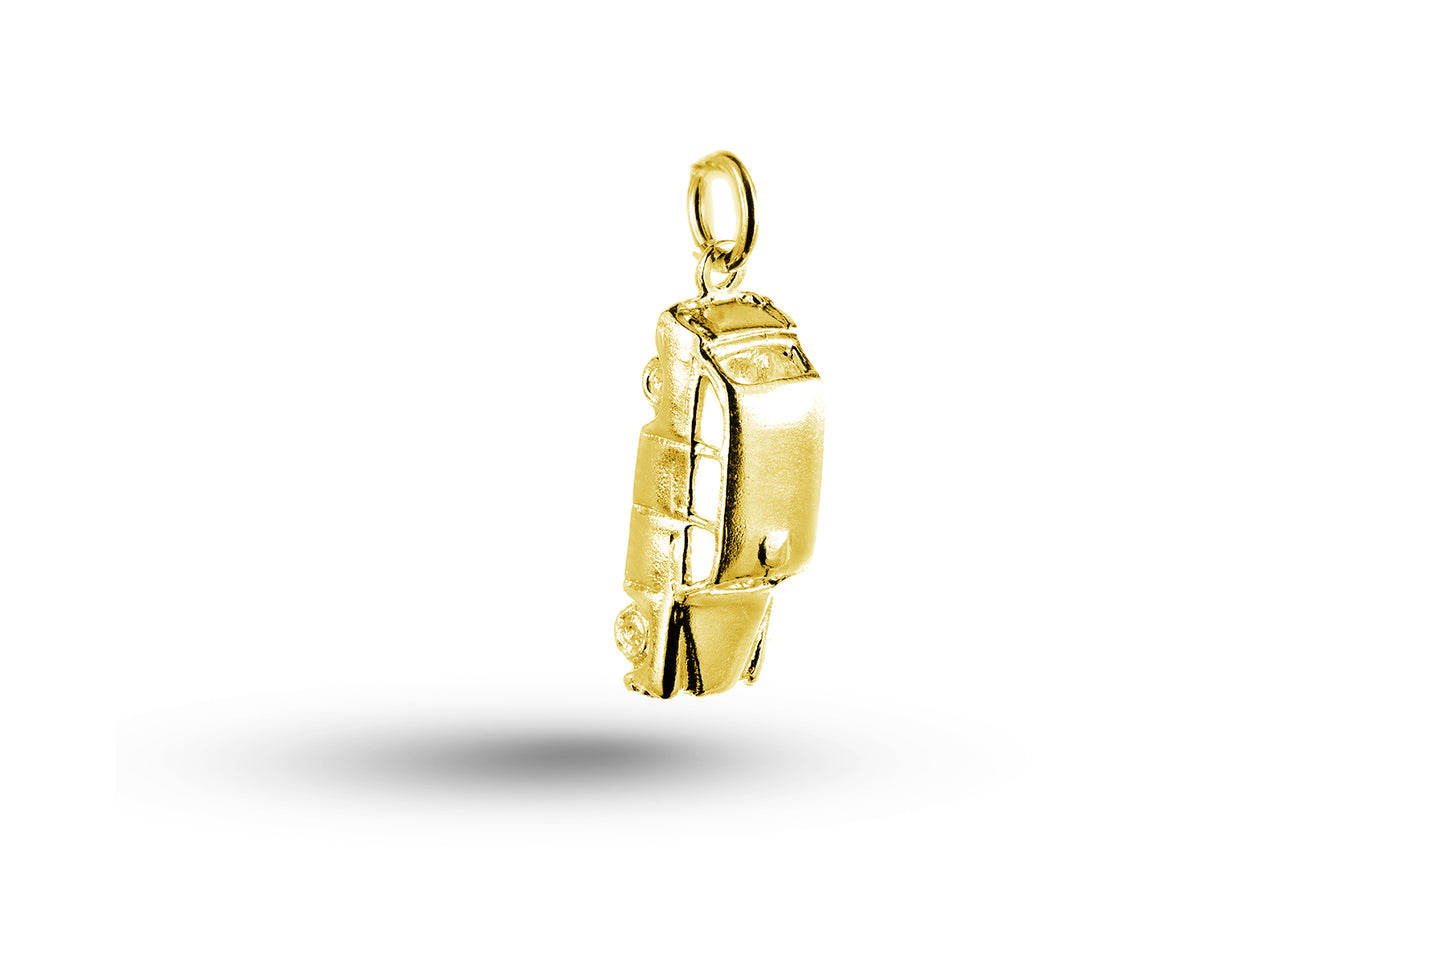 Yellow gold Taxi Cab charm.